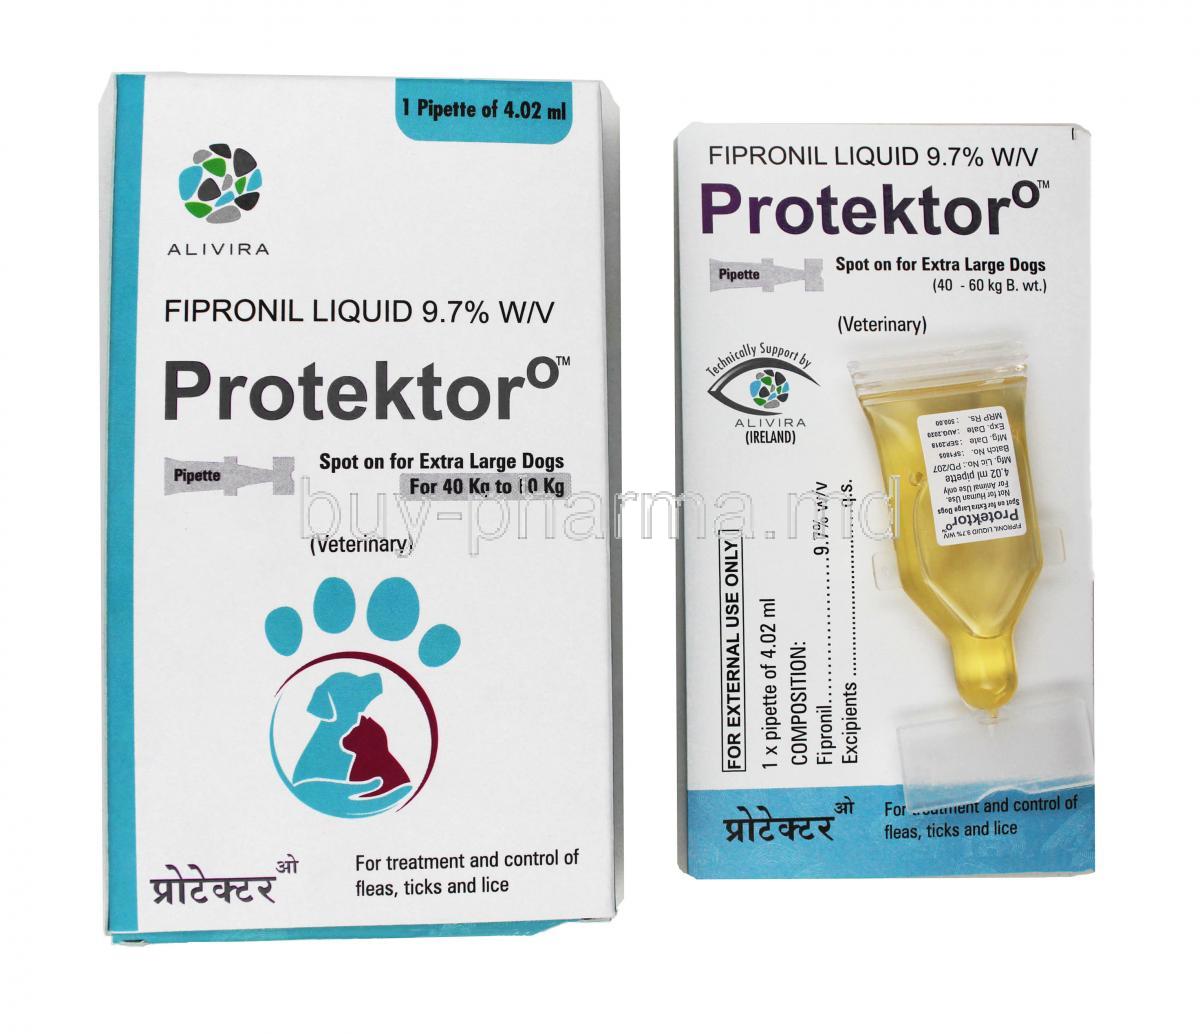 PROTEKTOR O (40-60KG) Spot on Extra Large dog, Fipronil, 4.02ml, Box and Pipette